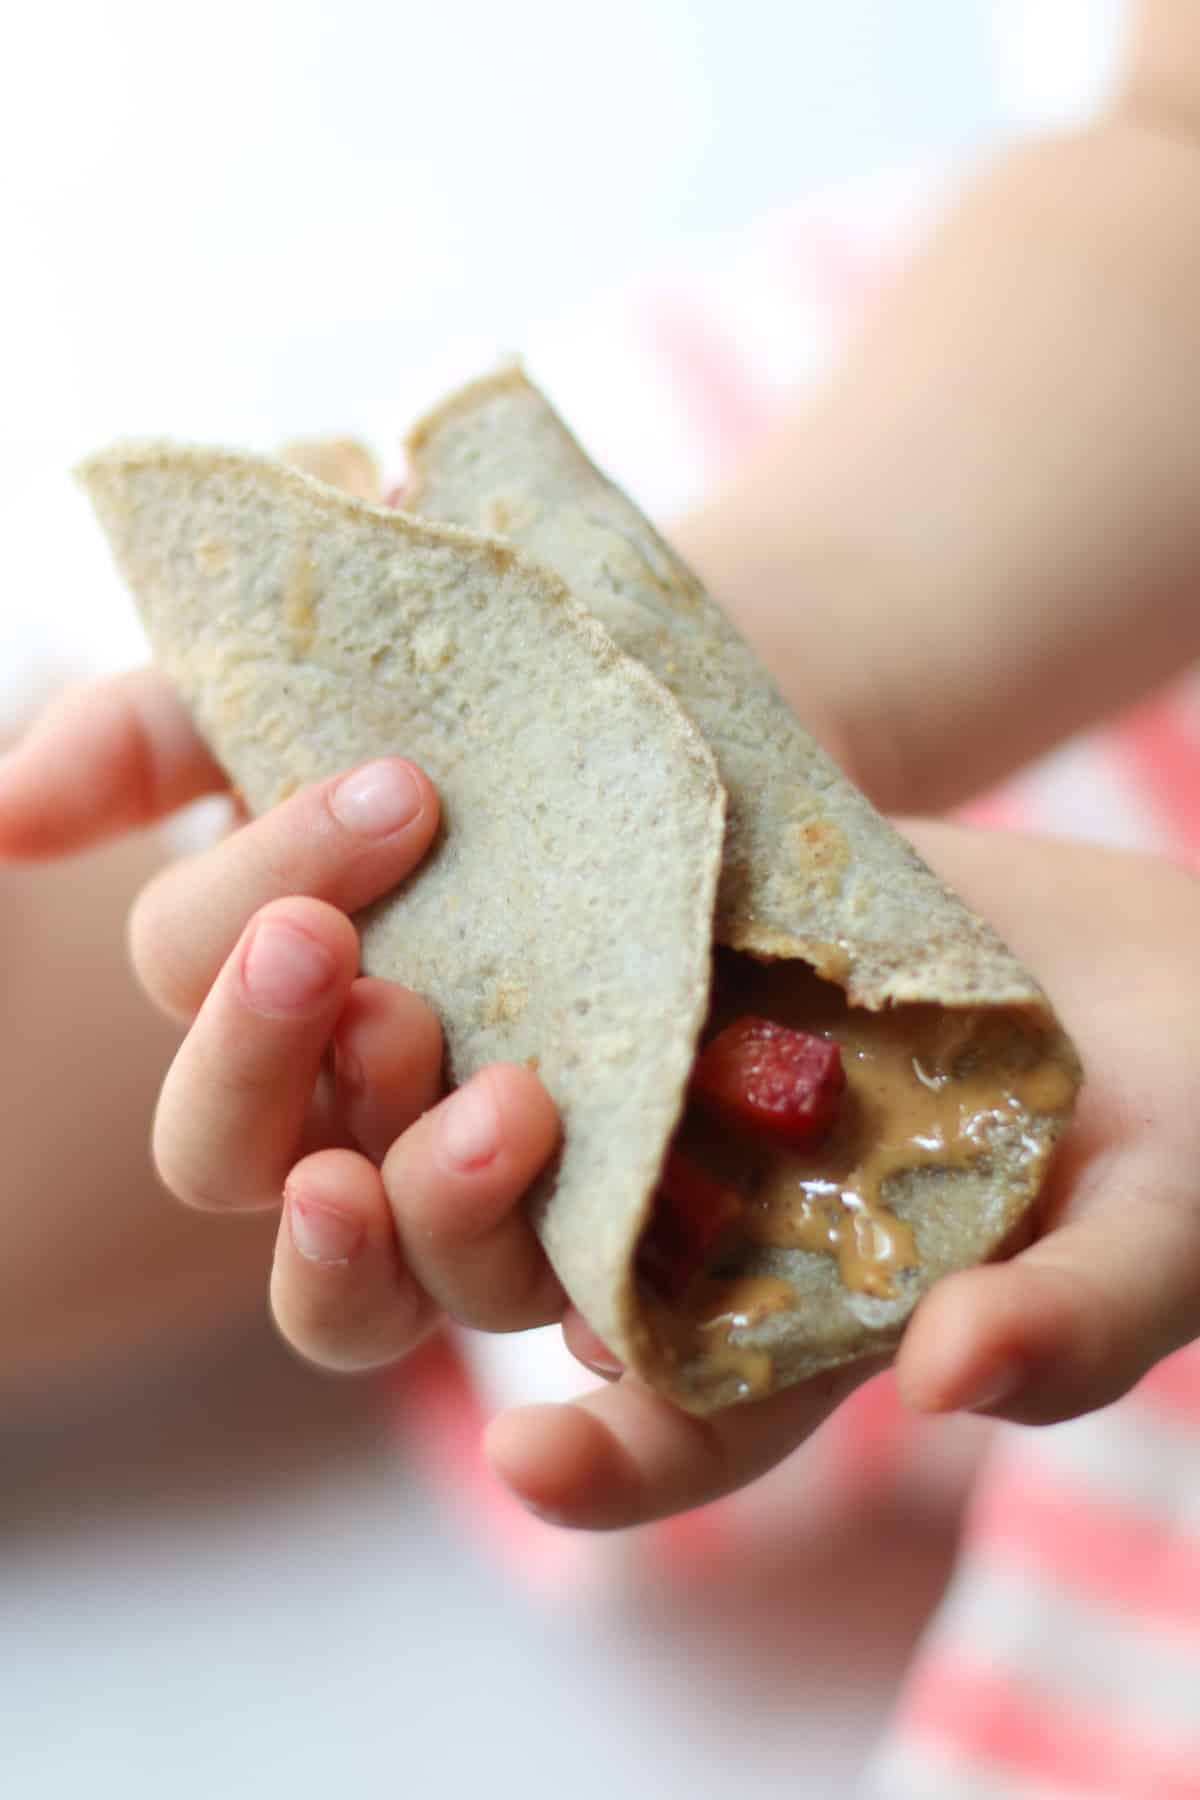 Toddler's hands holding quinoa wrap filled with strawberries and peanut butter.